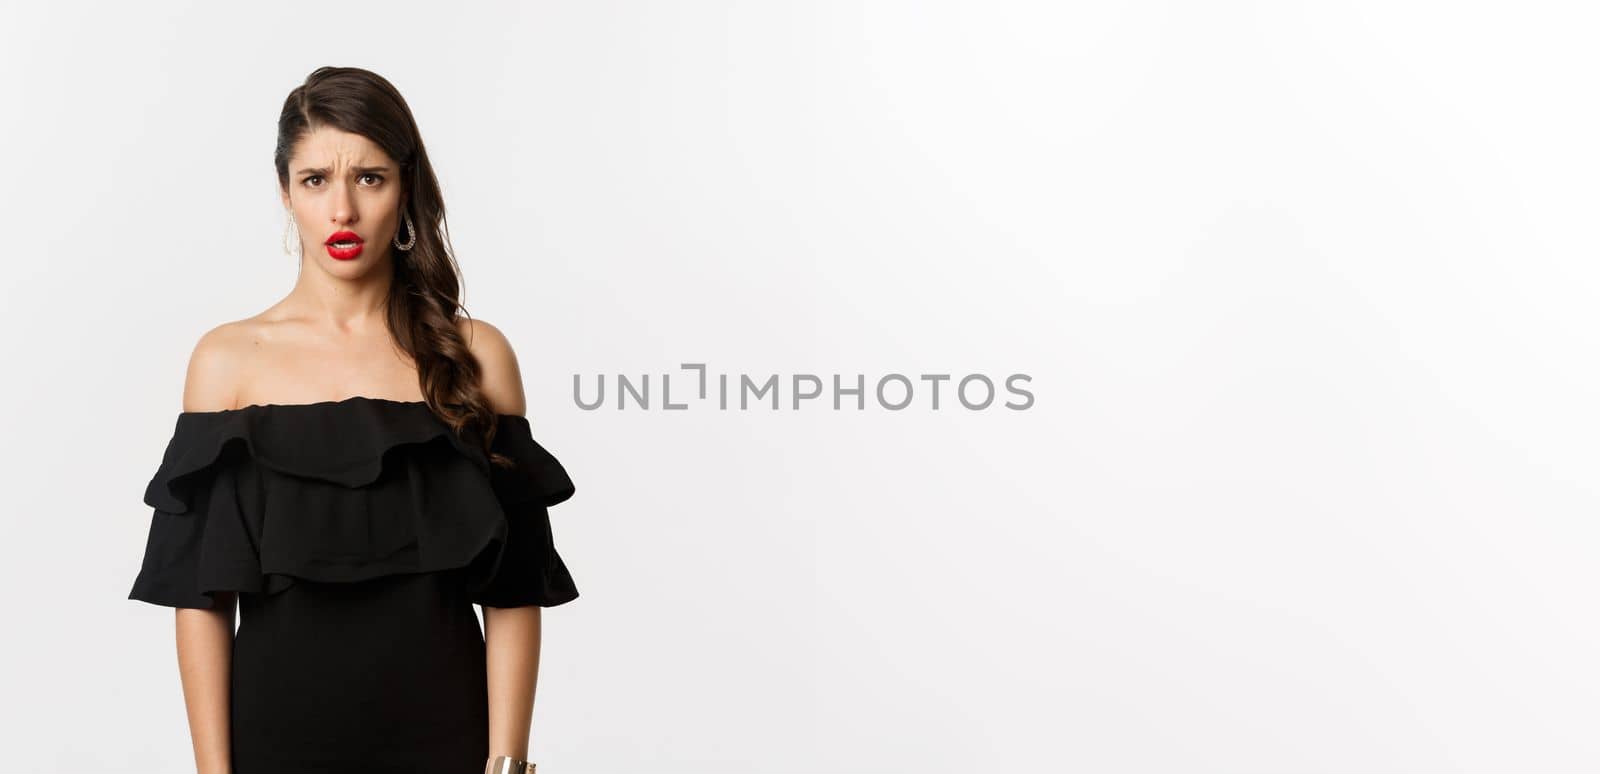 Fashion and beauty. Disappointed and upset woman in black dress staring at camera displeased, complaining with jealous look, standing over white background.